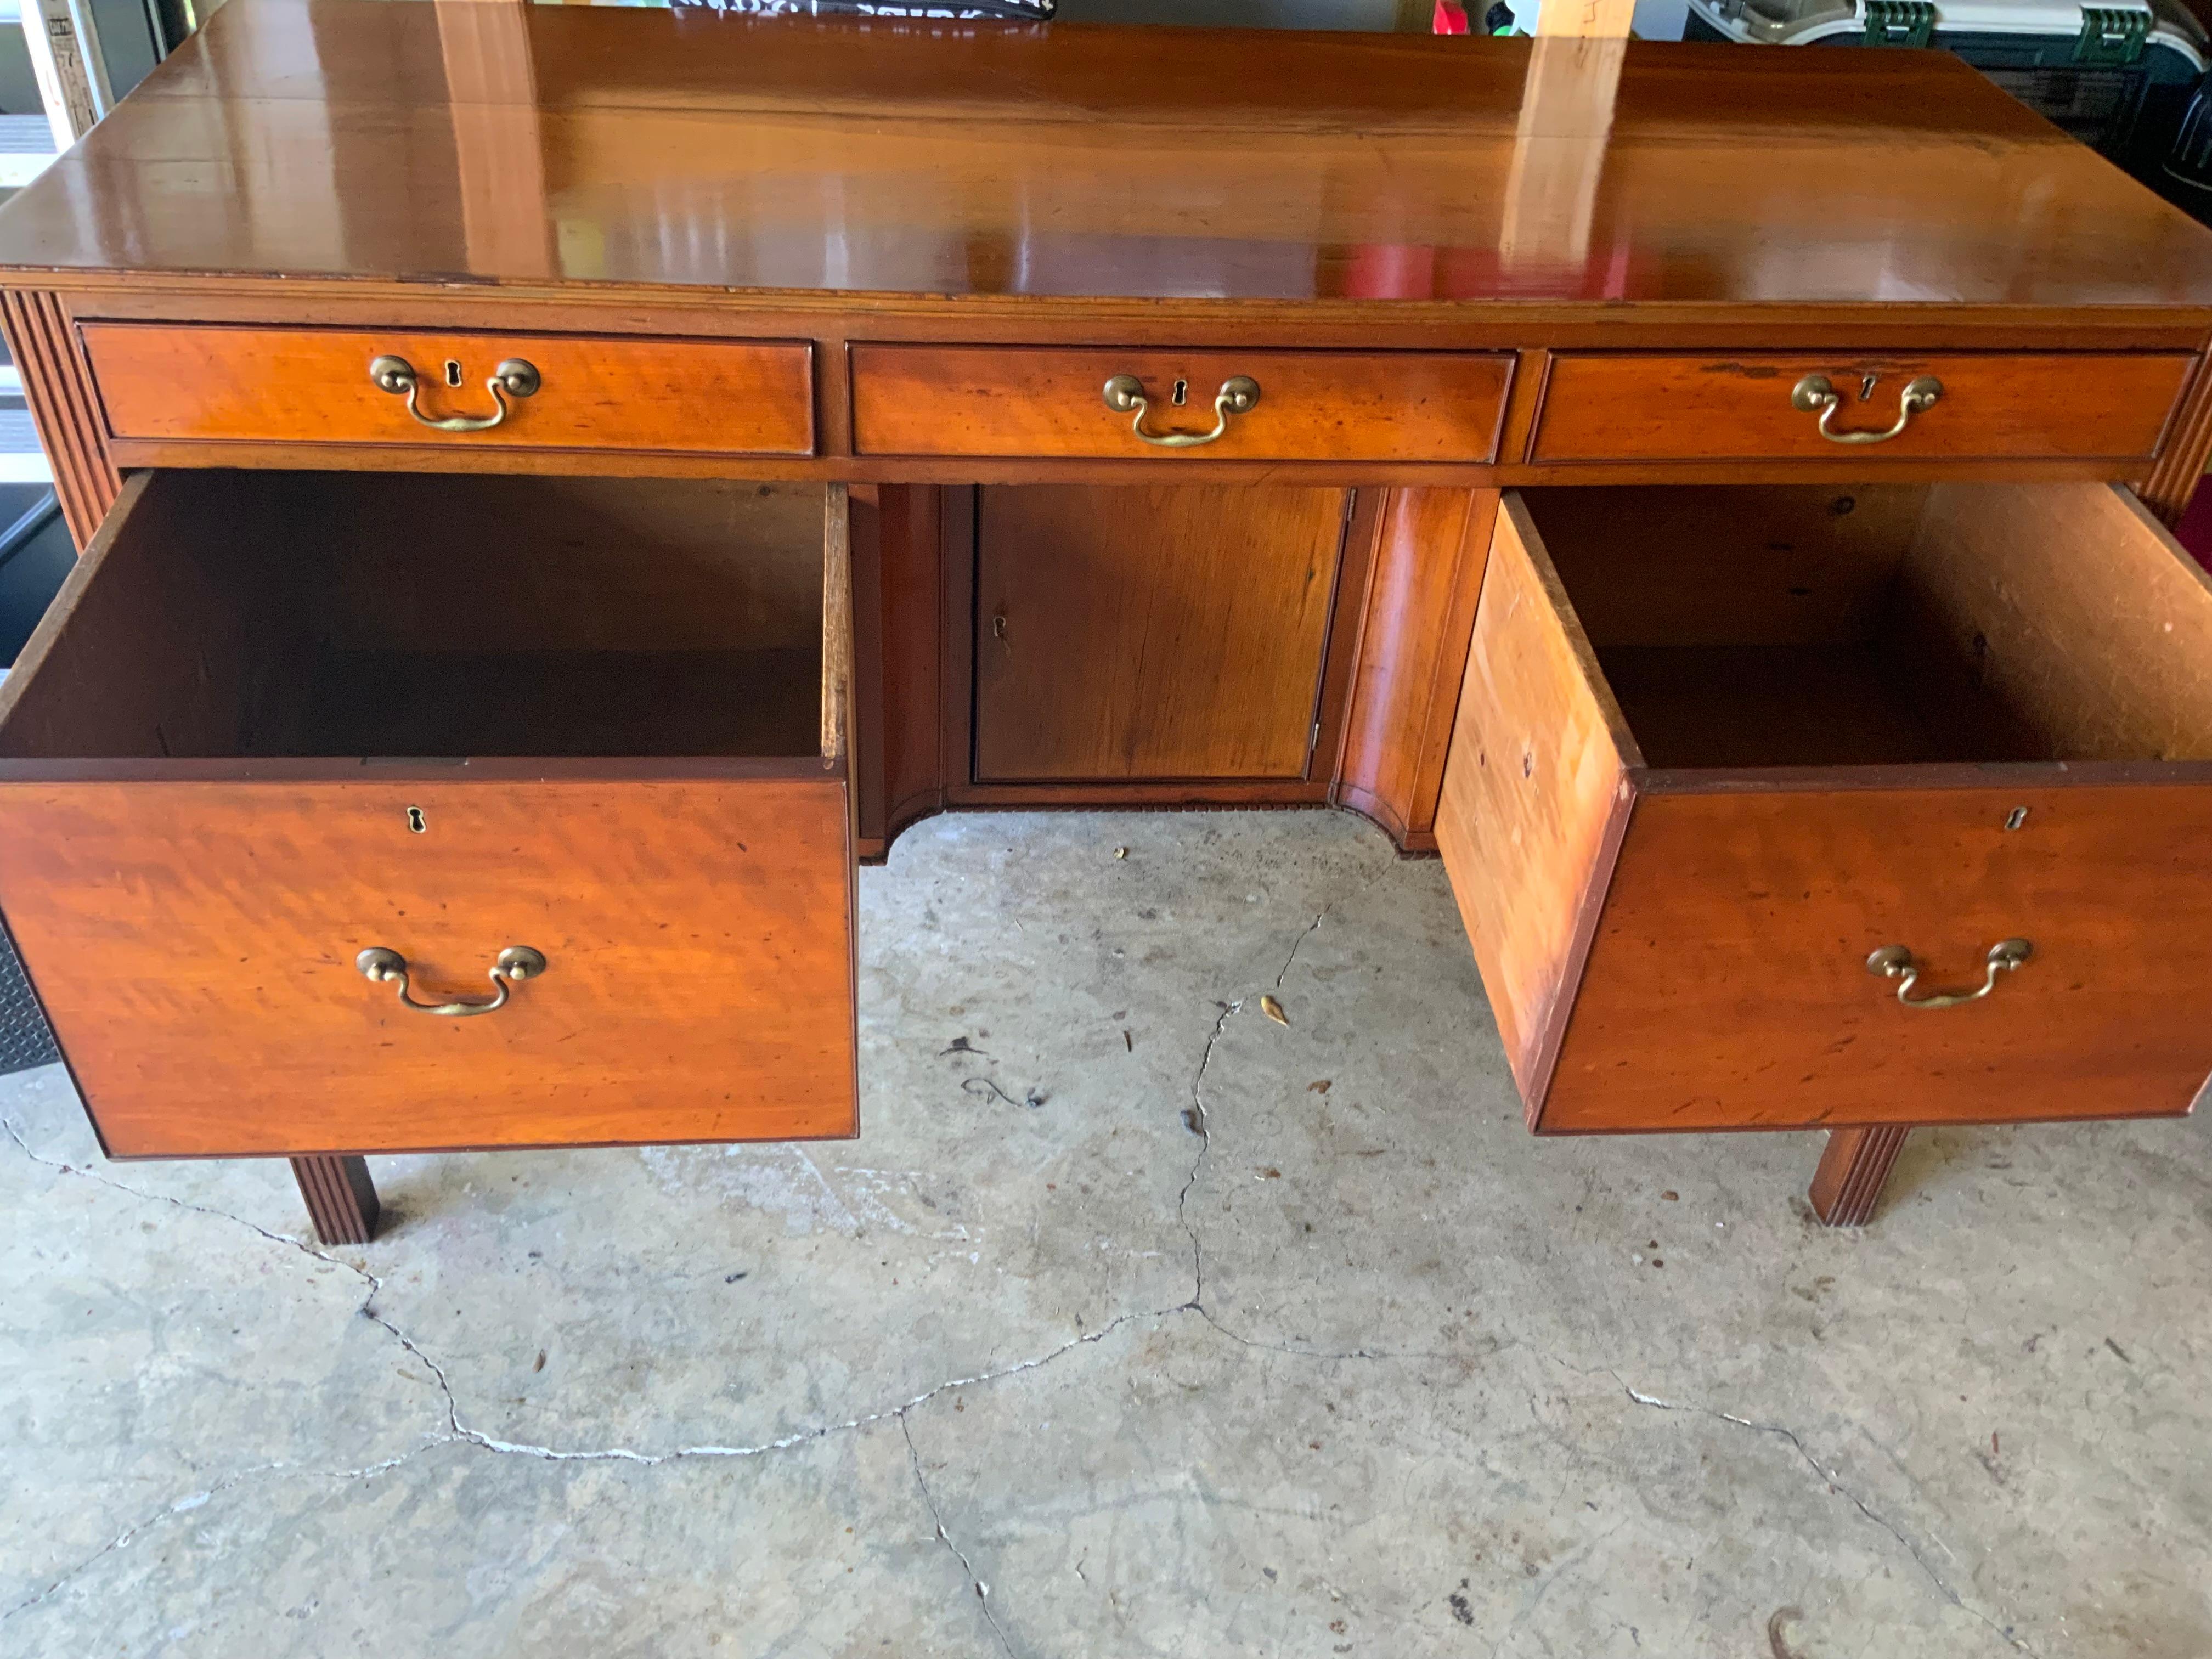  American federal Cherry Huntboard or 1800-1820 on carved concave fluted legs.  One center door storage compartment between two large deep drawers on either end under a bank of three smaller drawers, two of which have been previously lined with